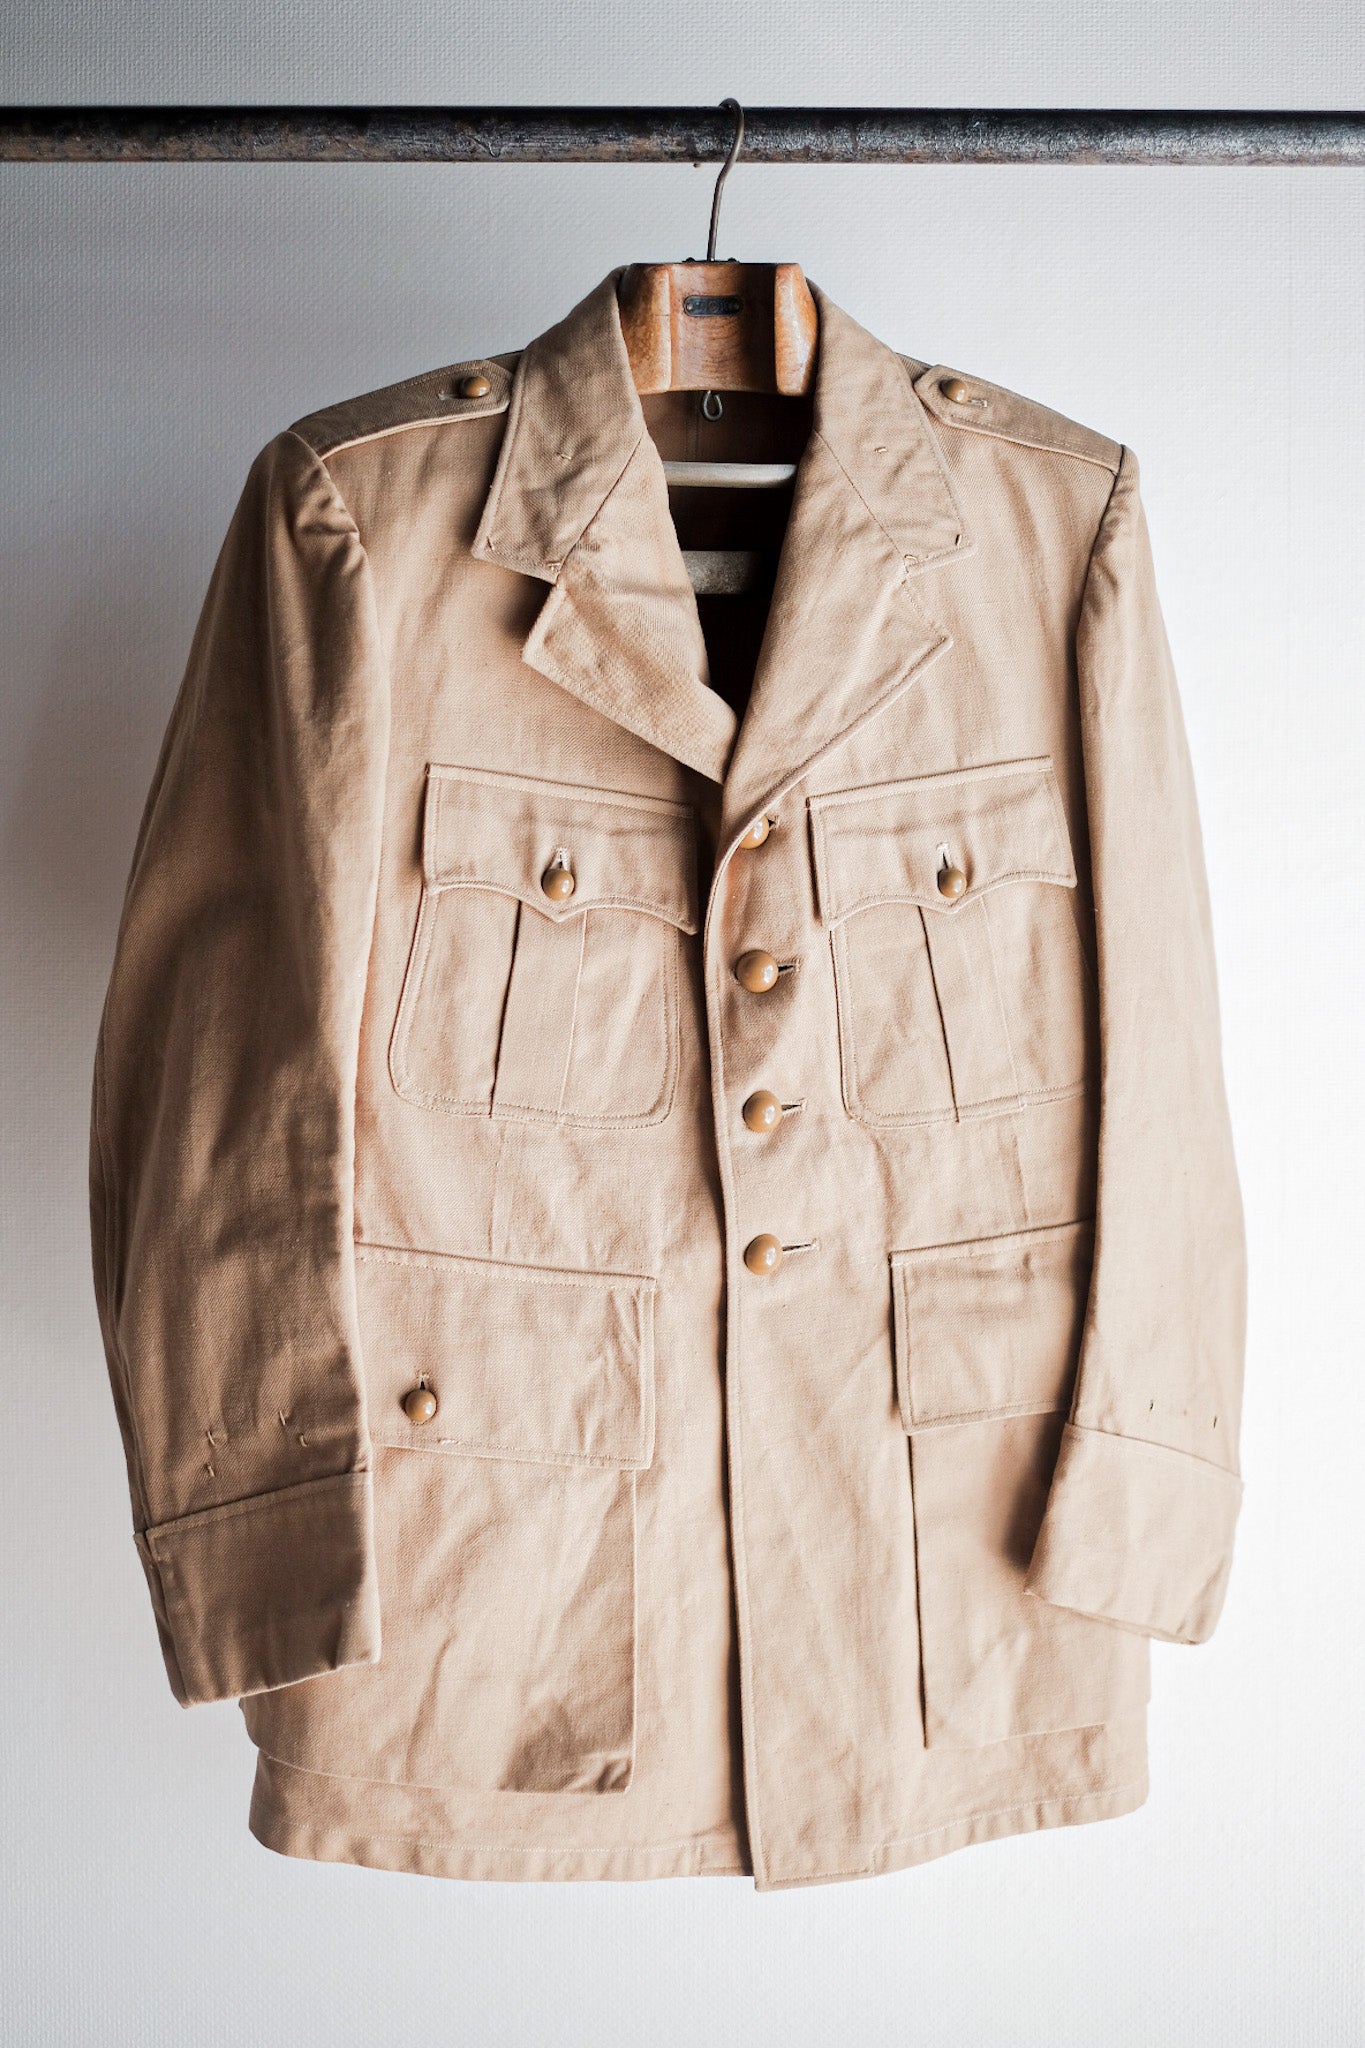 [~ 50's] French Vintage Cotton Linen CHINO JACKET "GARALLY LAFAYETTE" "DEAD STOCK"